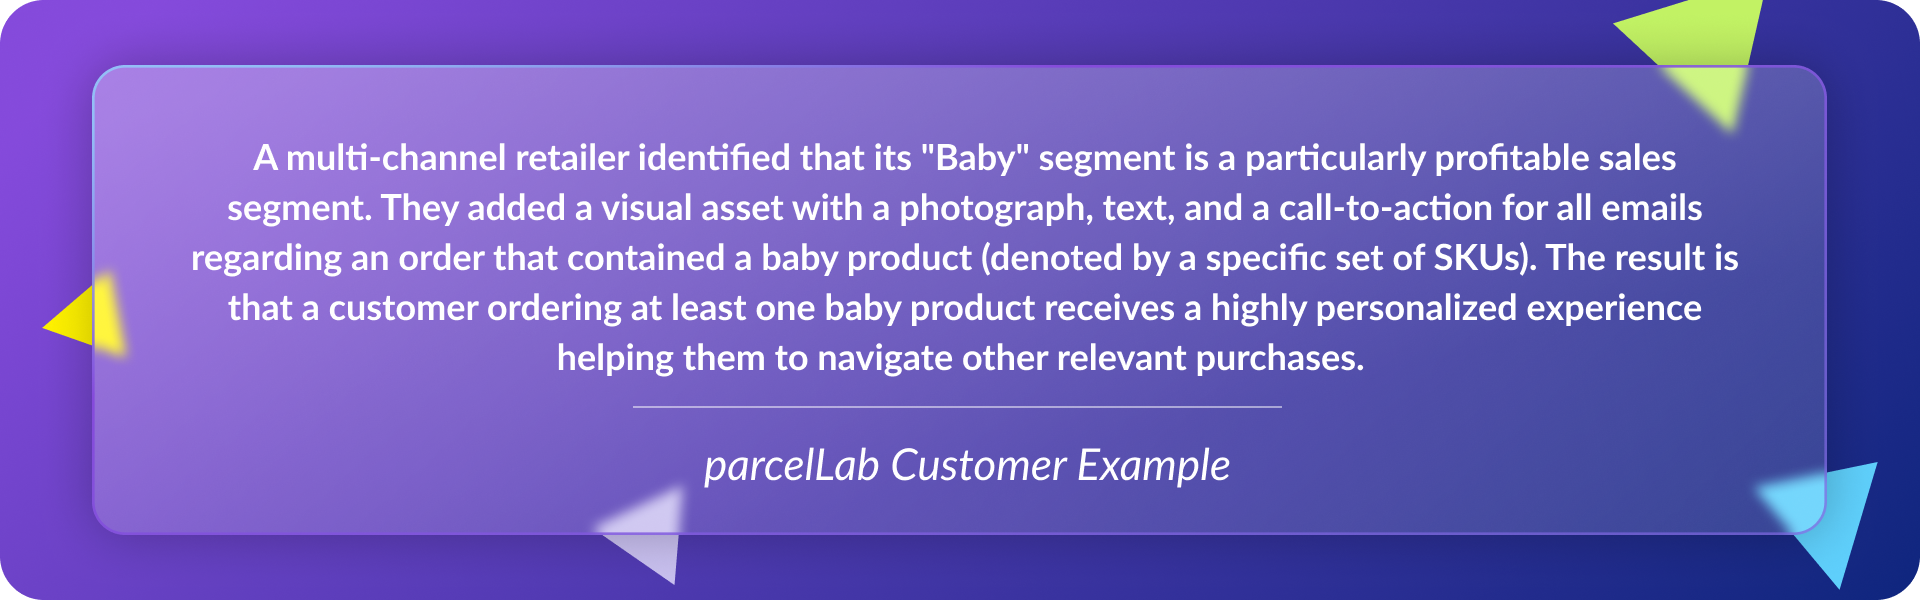 parcelLab Customer Example - Personalization